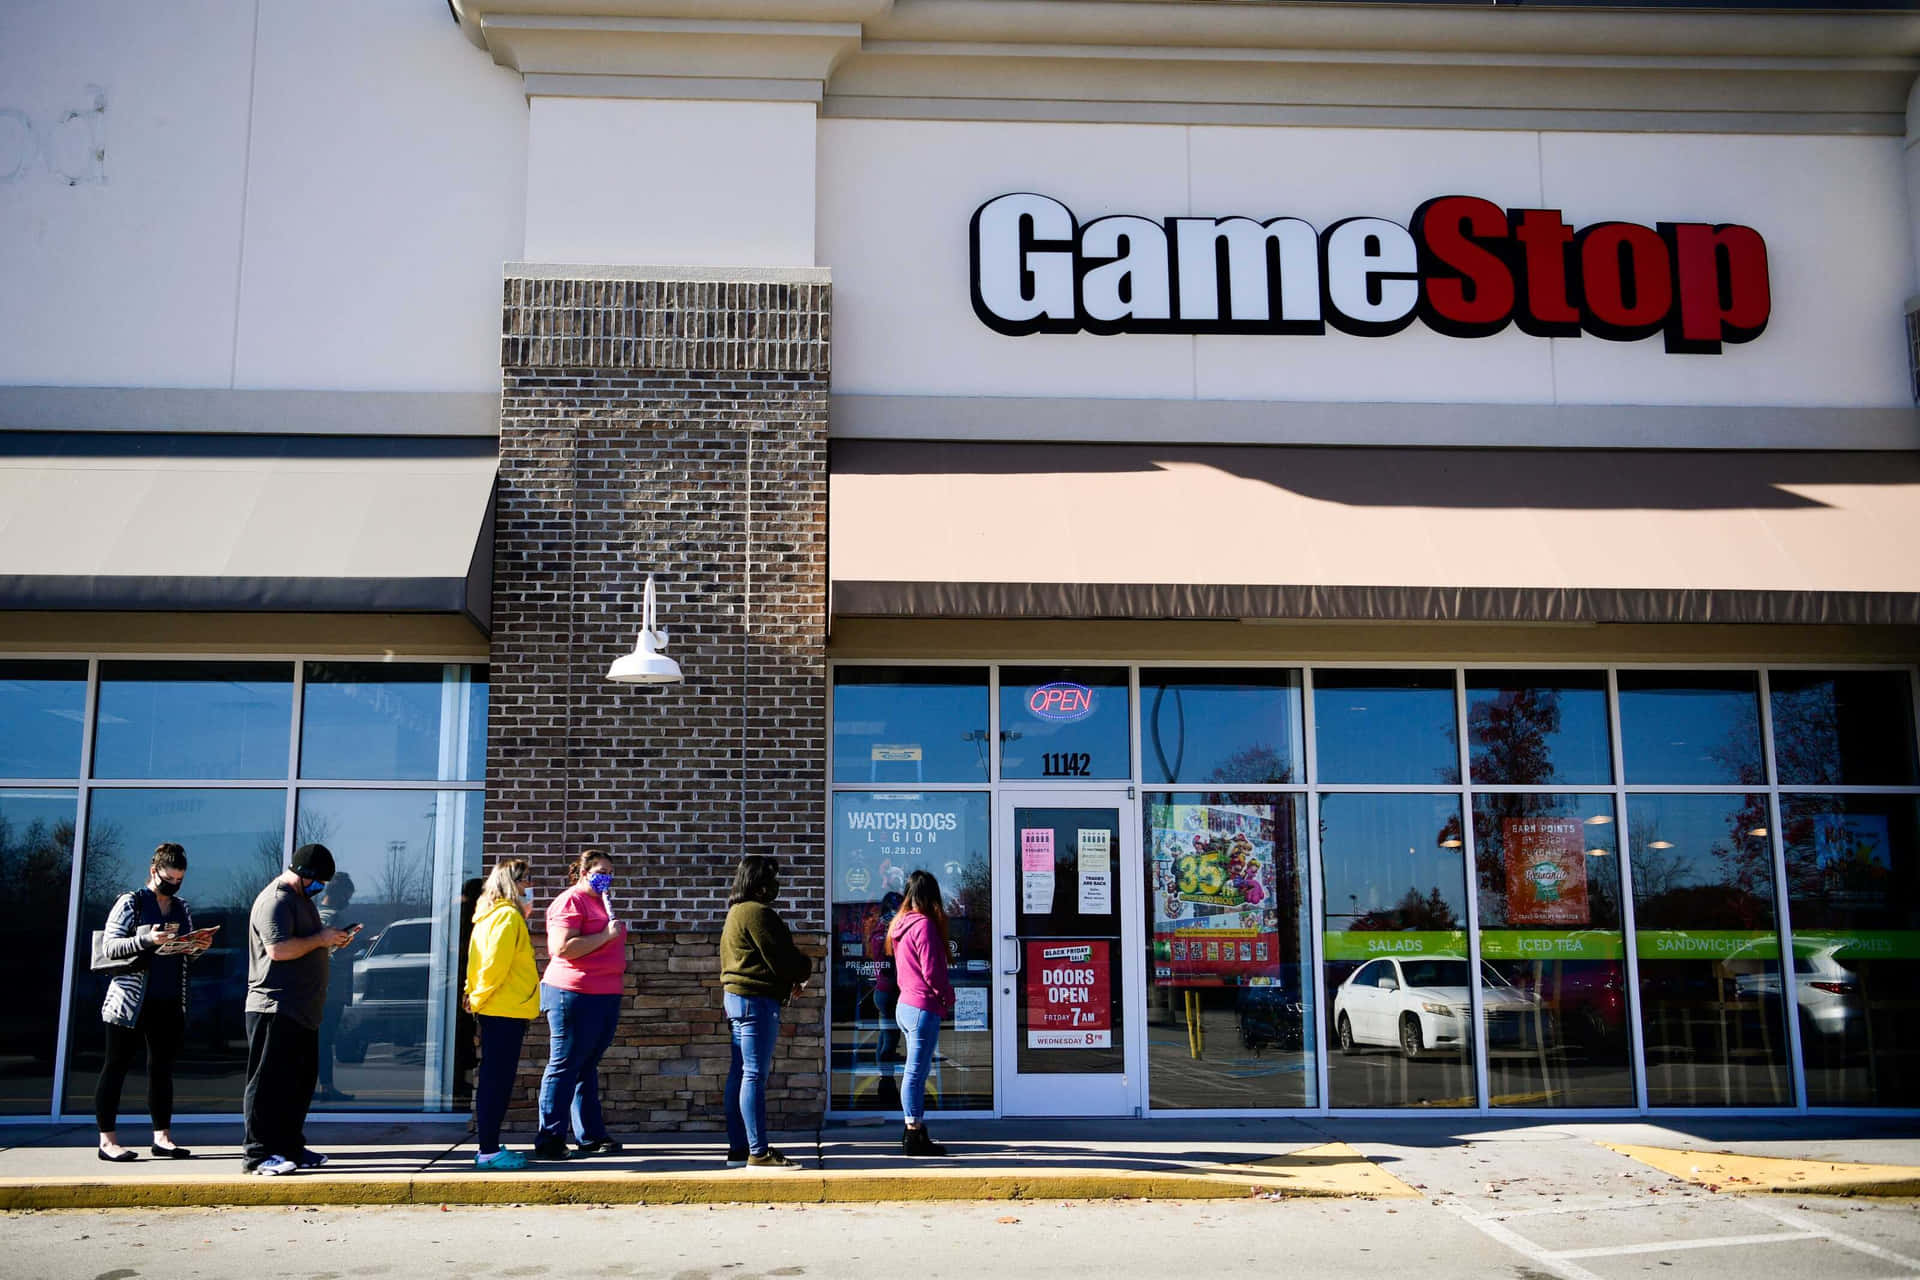 Be the life of the game with Gamestop!